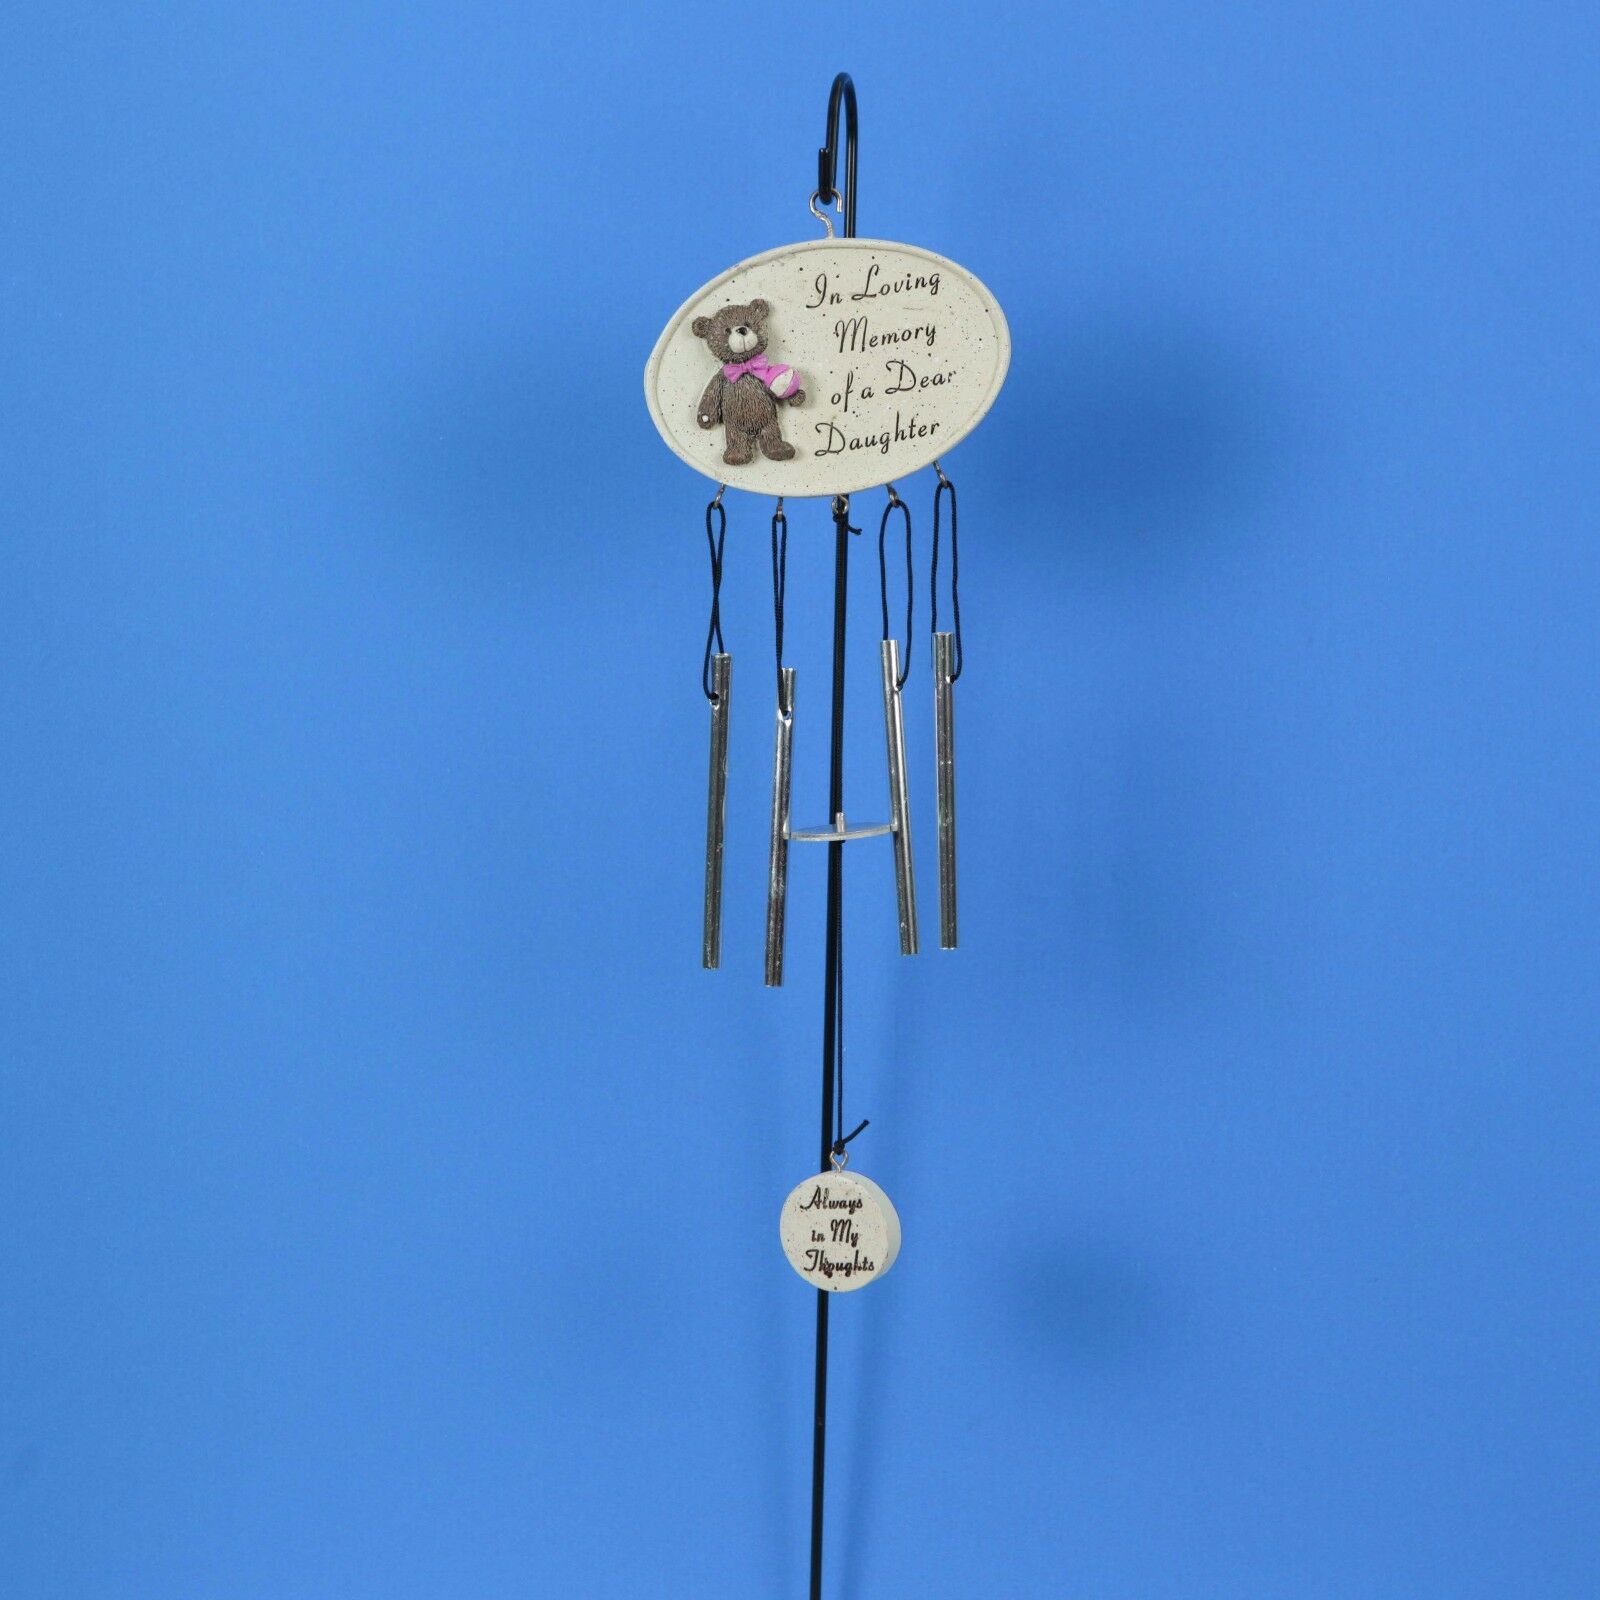 David Fischhoff Grave Memorial Wind Chime Stone Ornament  - Daughter